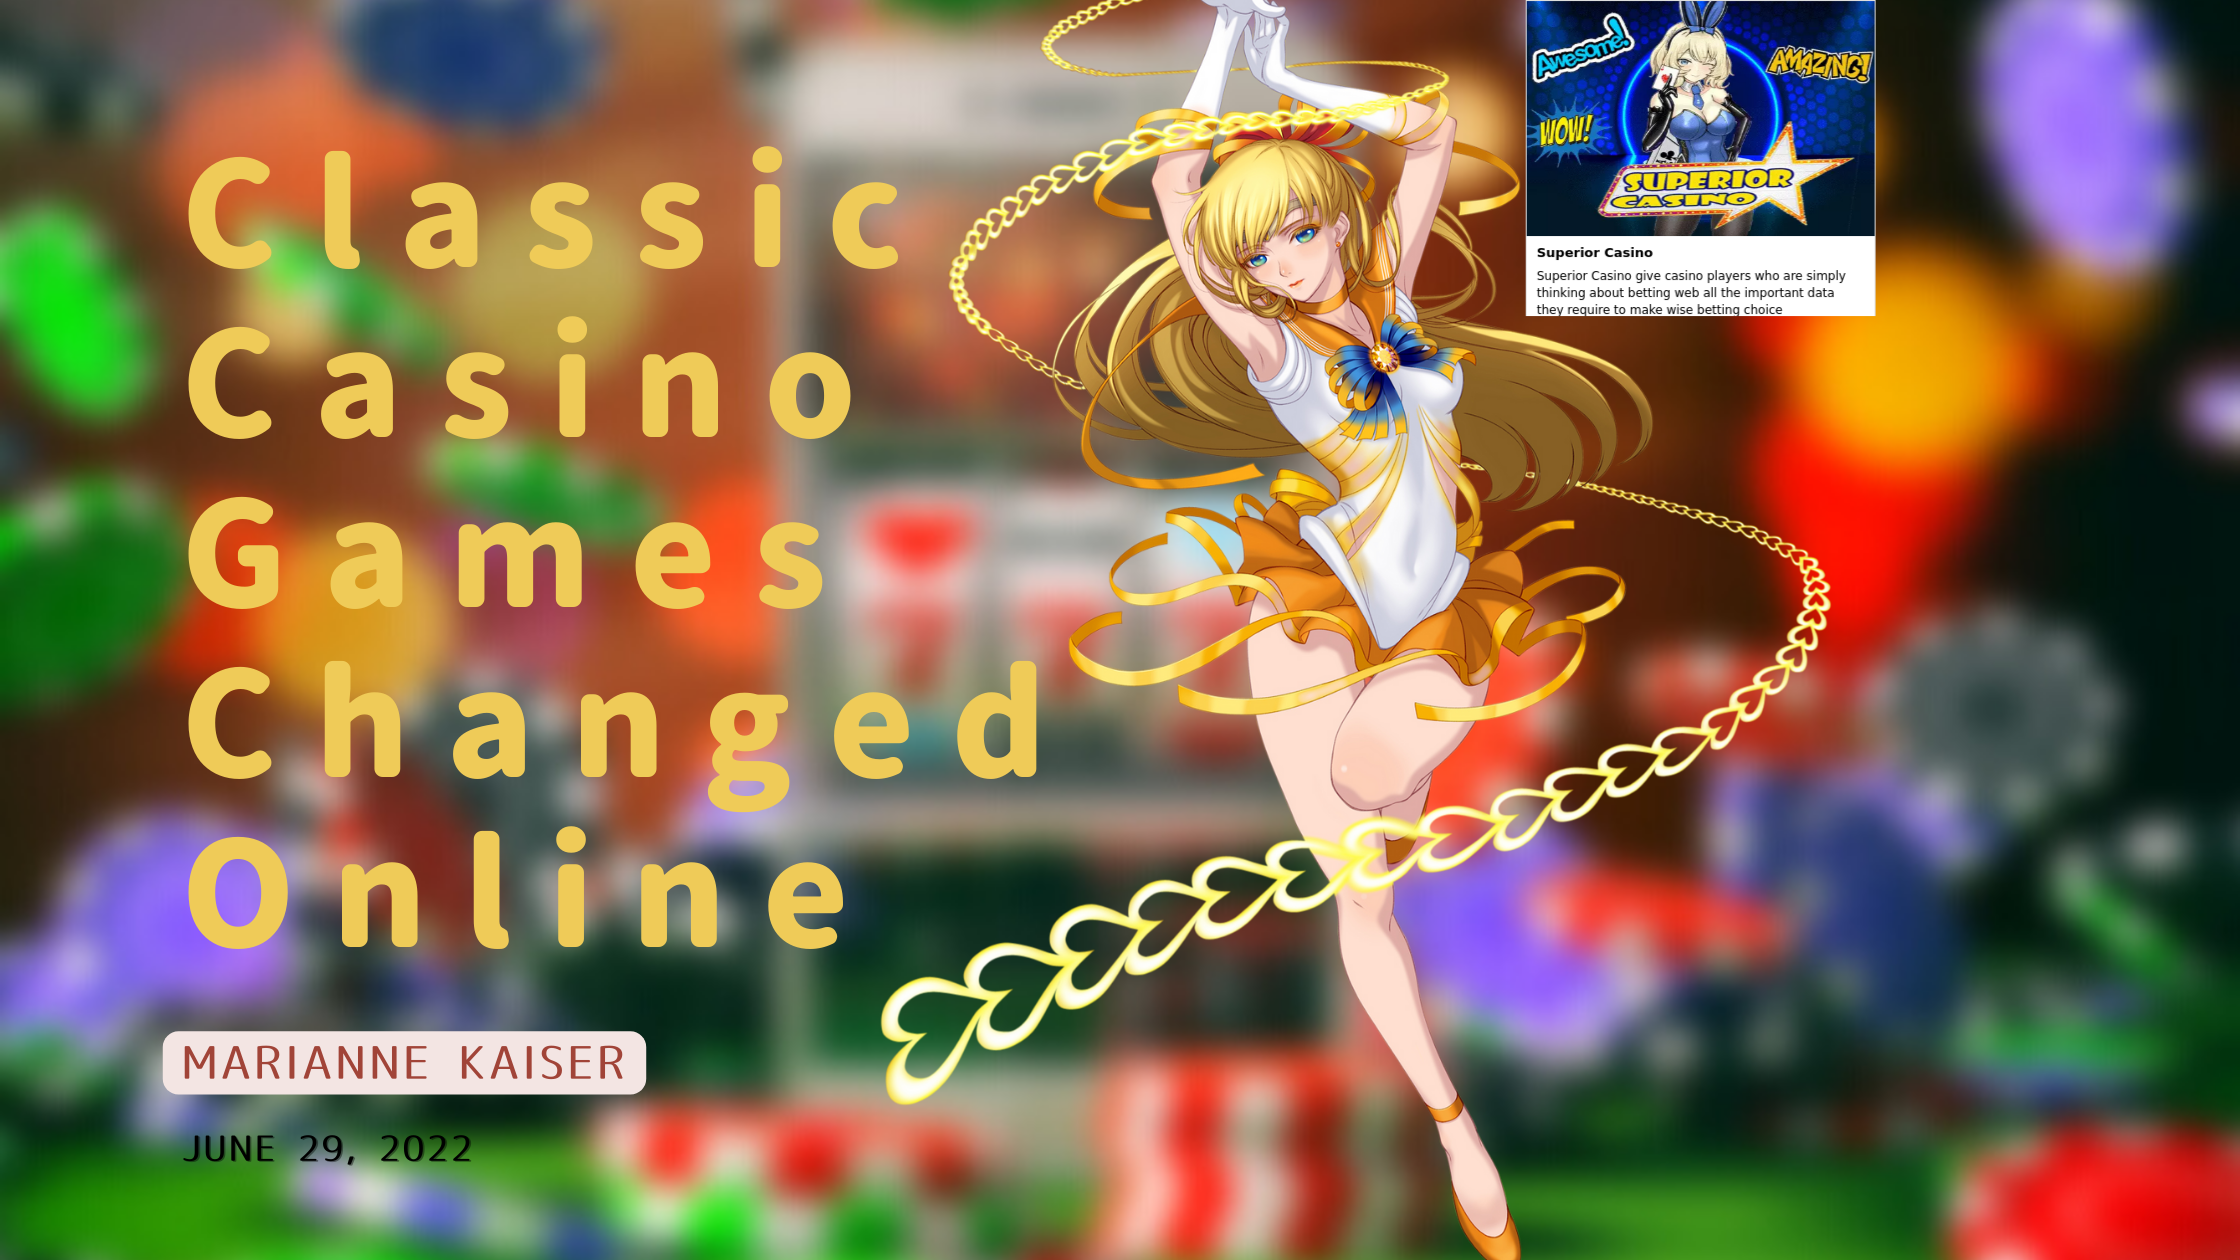 Classic Casino Games Changed Online